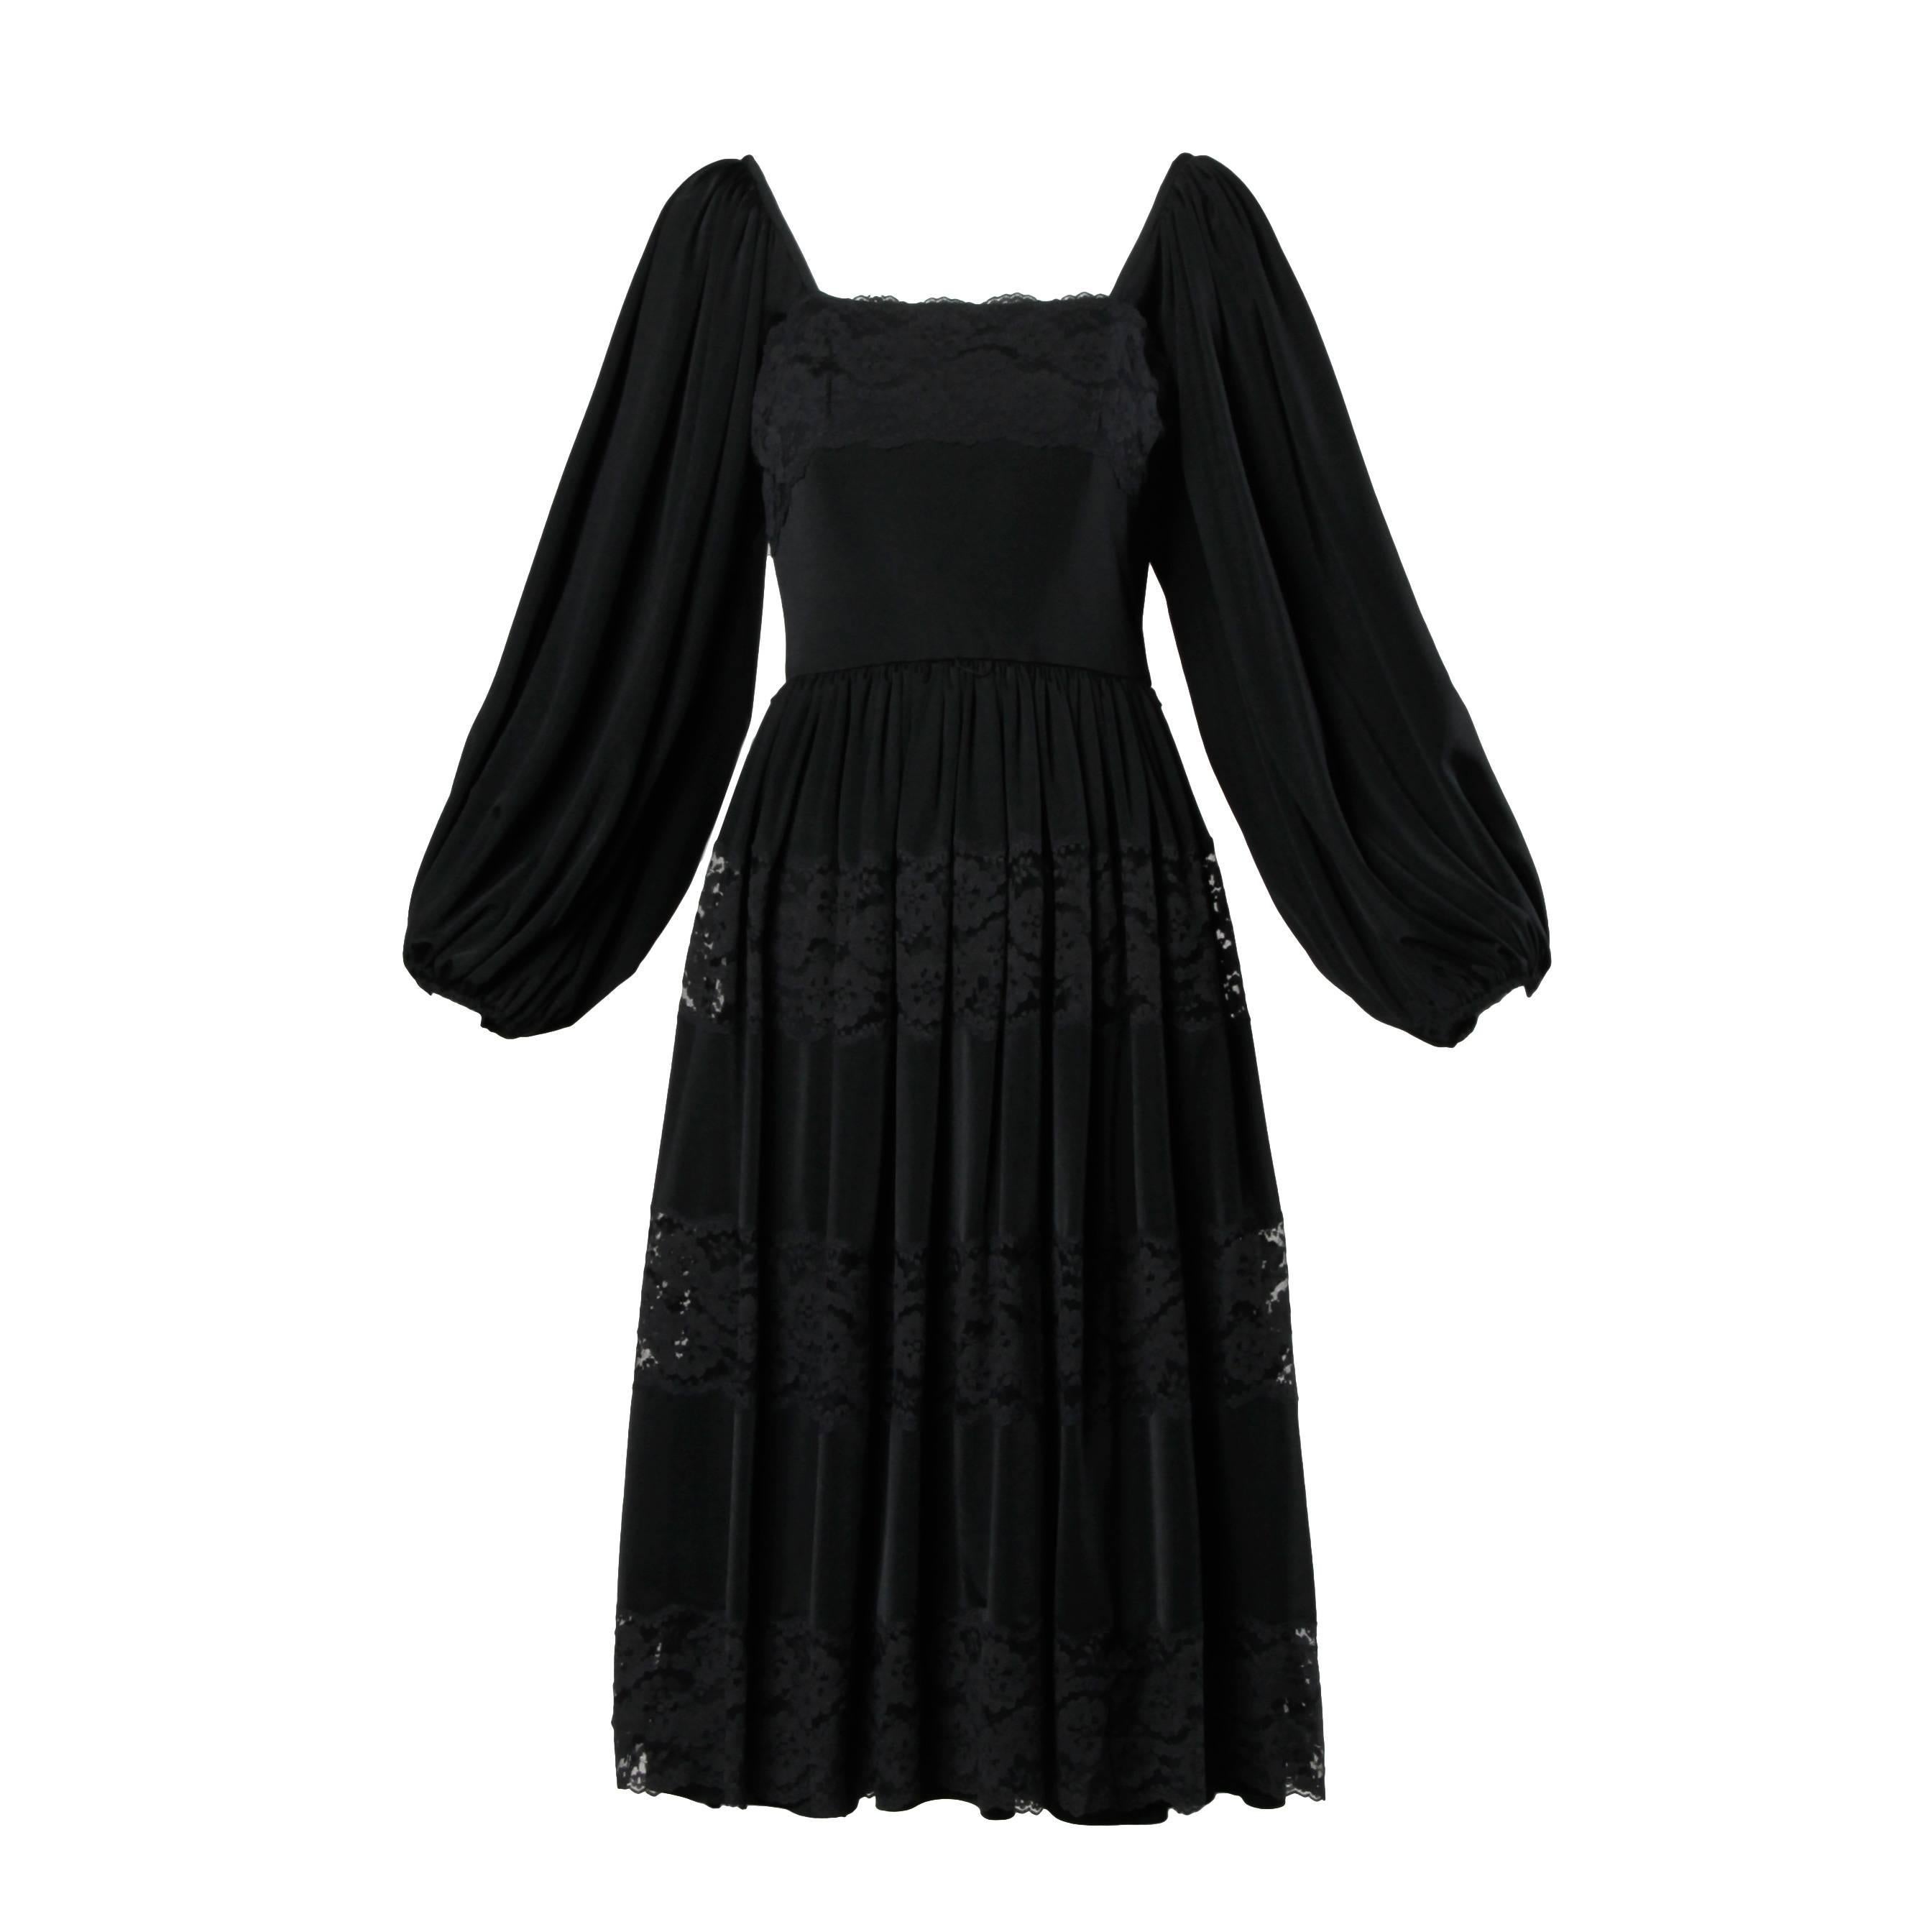 Donald Brooks 1970s Vintage Black Lace Dress with Balloon Sleeves